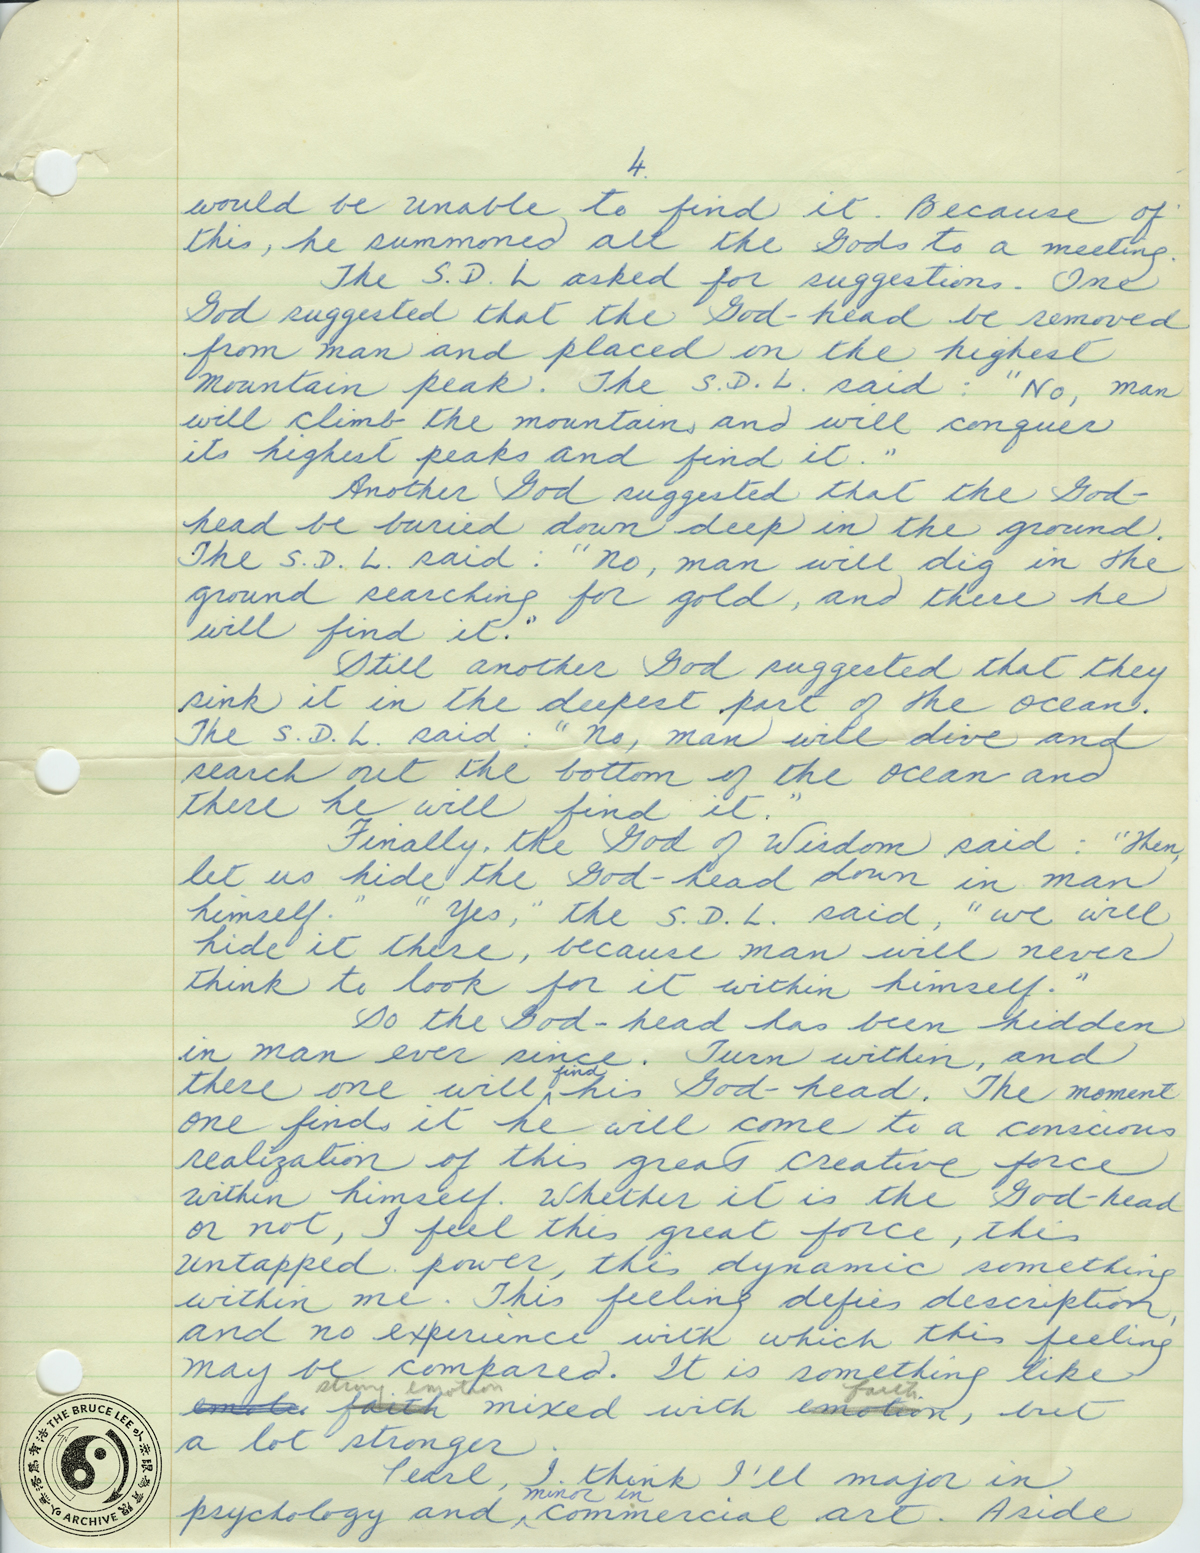 Letter-to-Pearl-draft-pg.4-archive.jpg